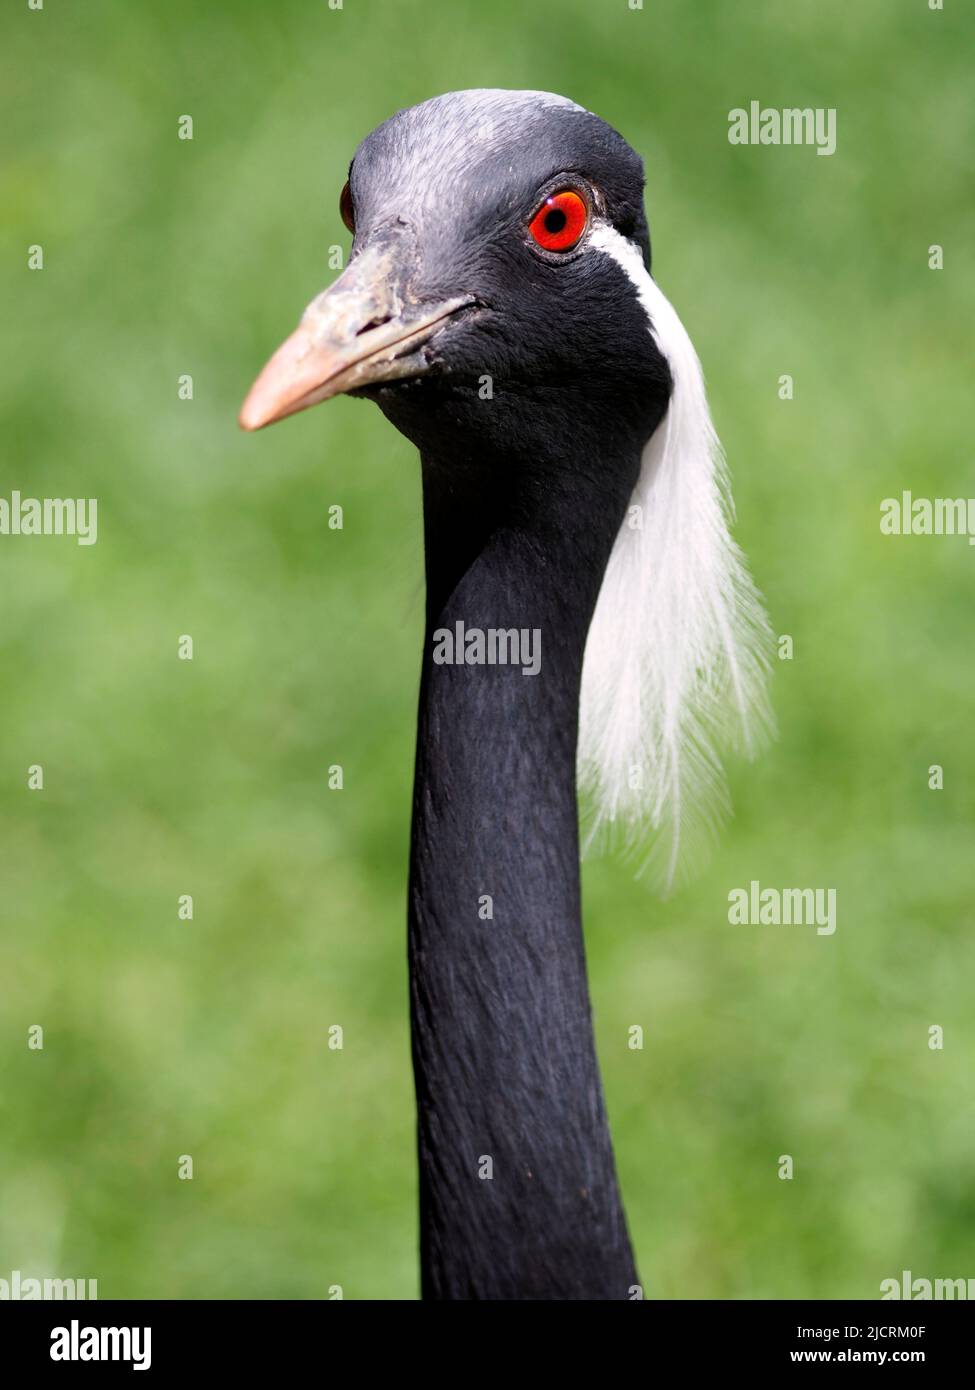 Closeup demoiselle cranes (Anthropoides virgo) on a green background of greenery Stock Photo